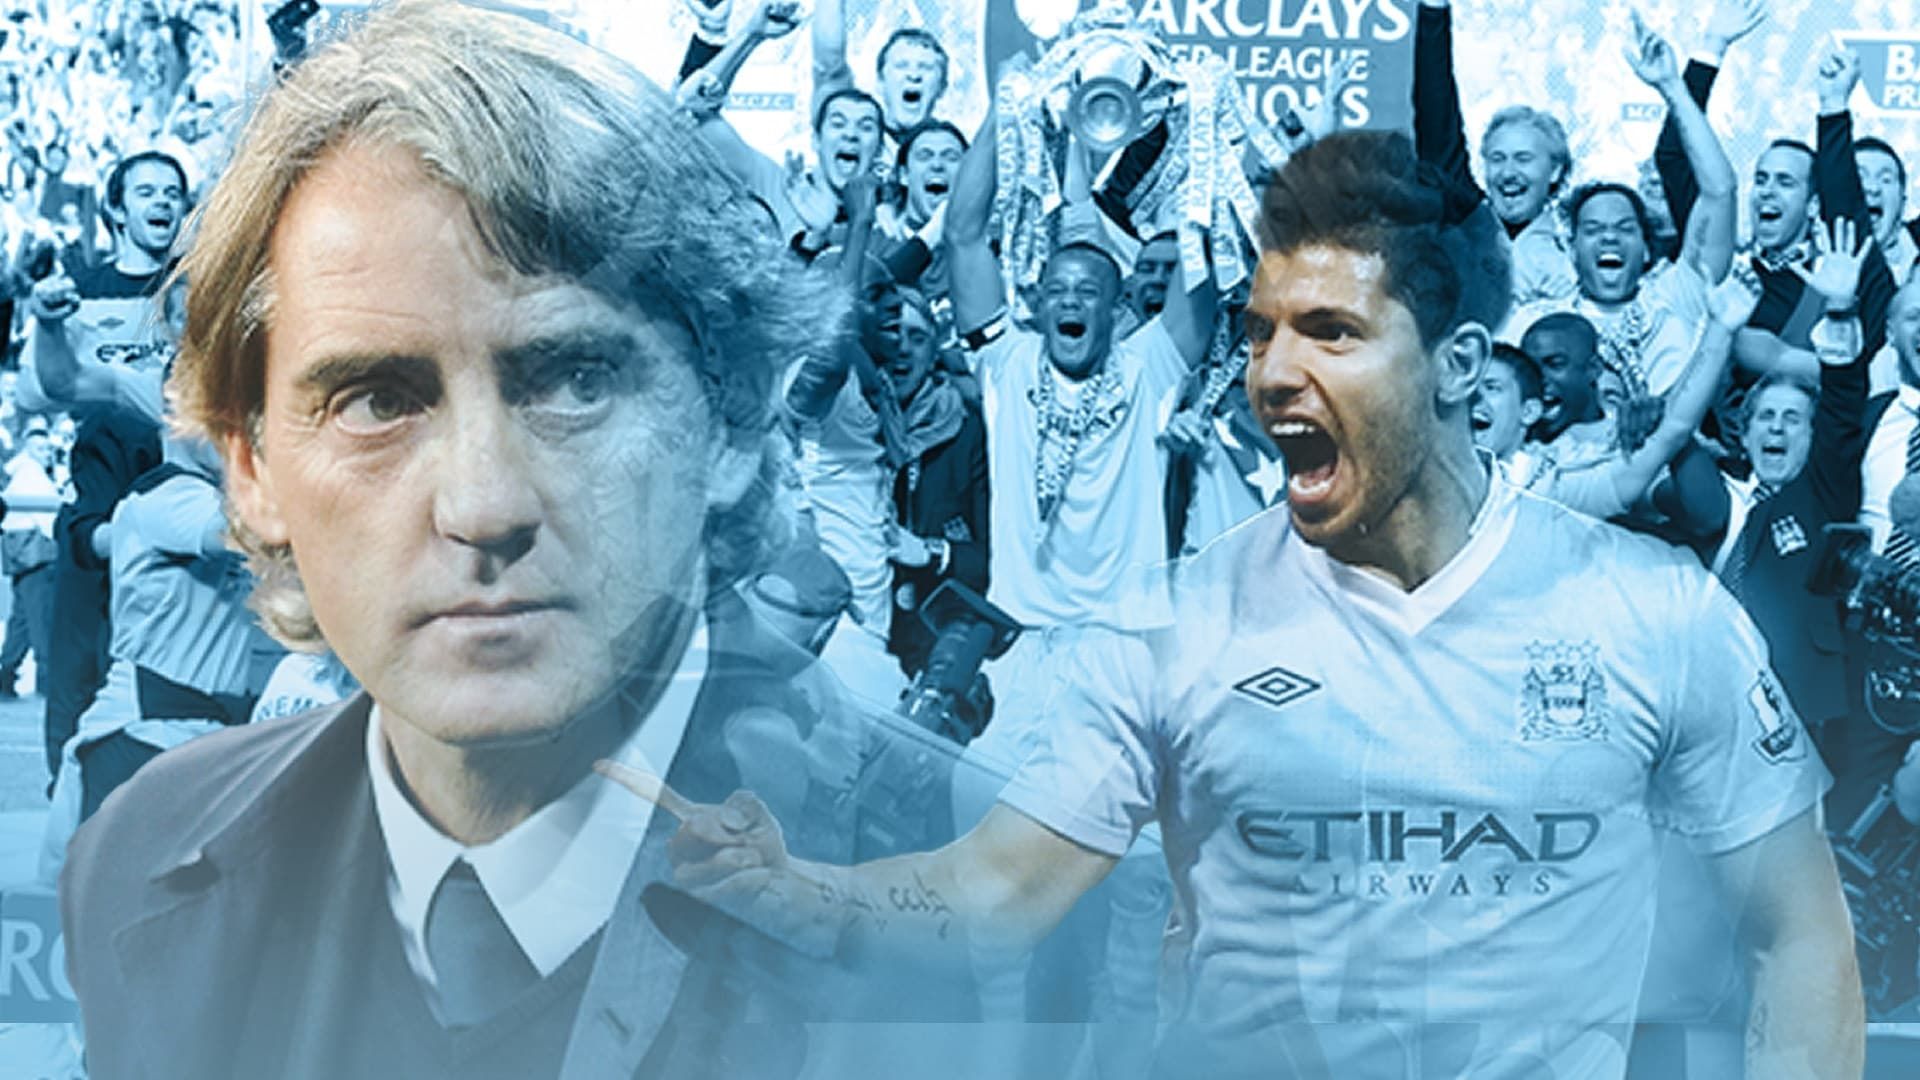 Drink It In: The Rise of Man City background